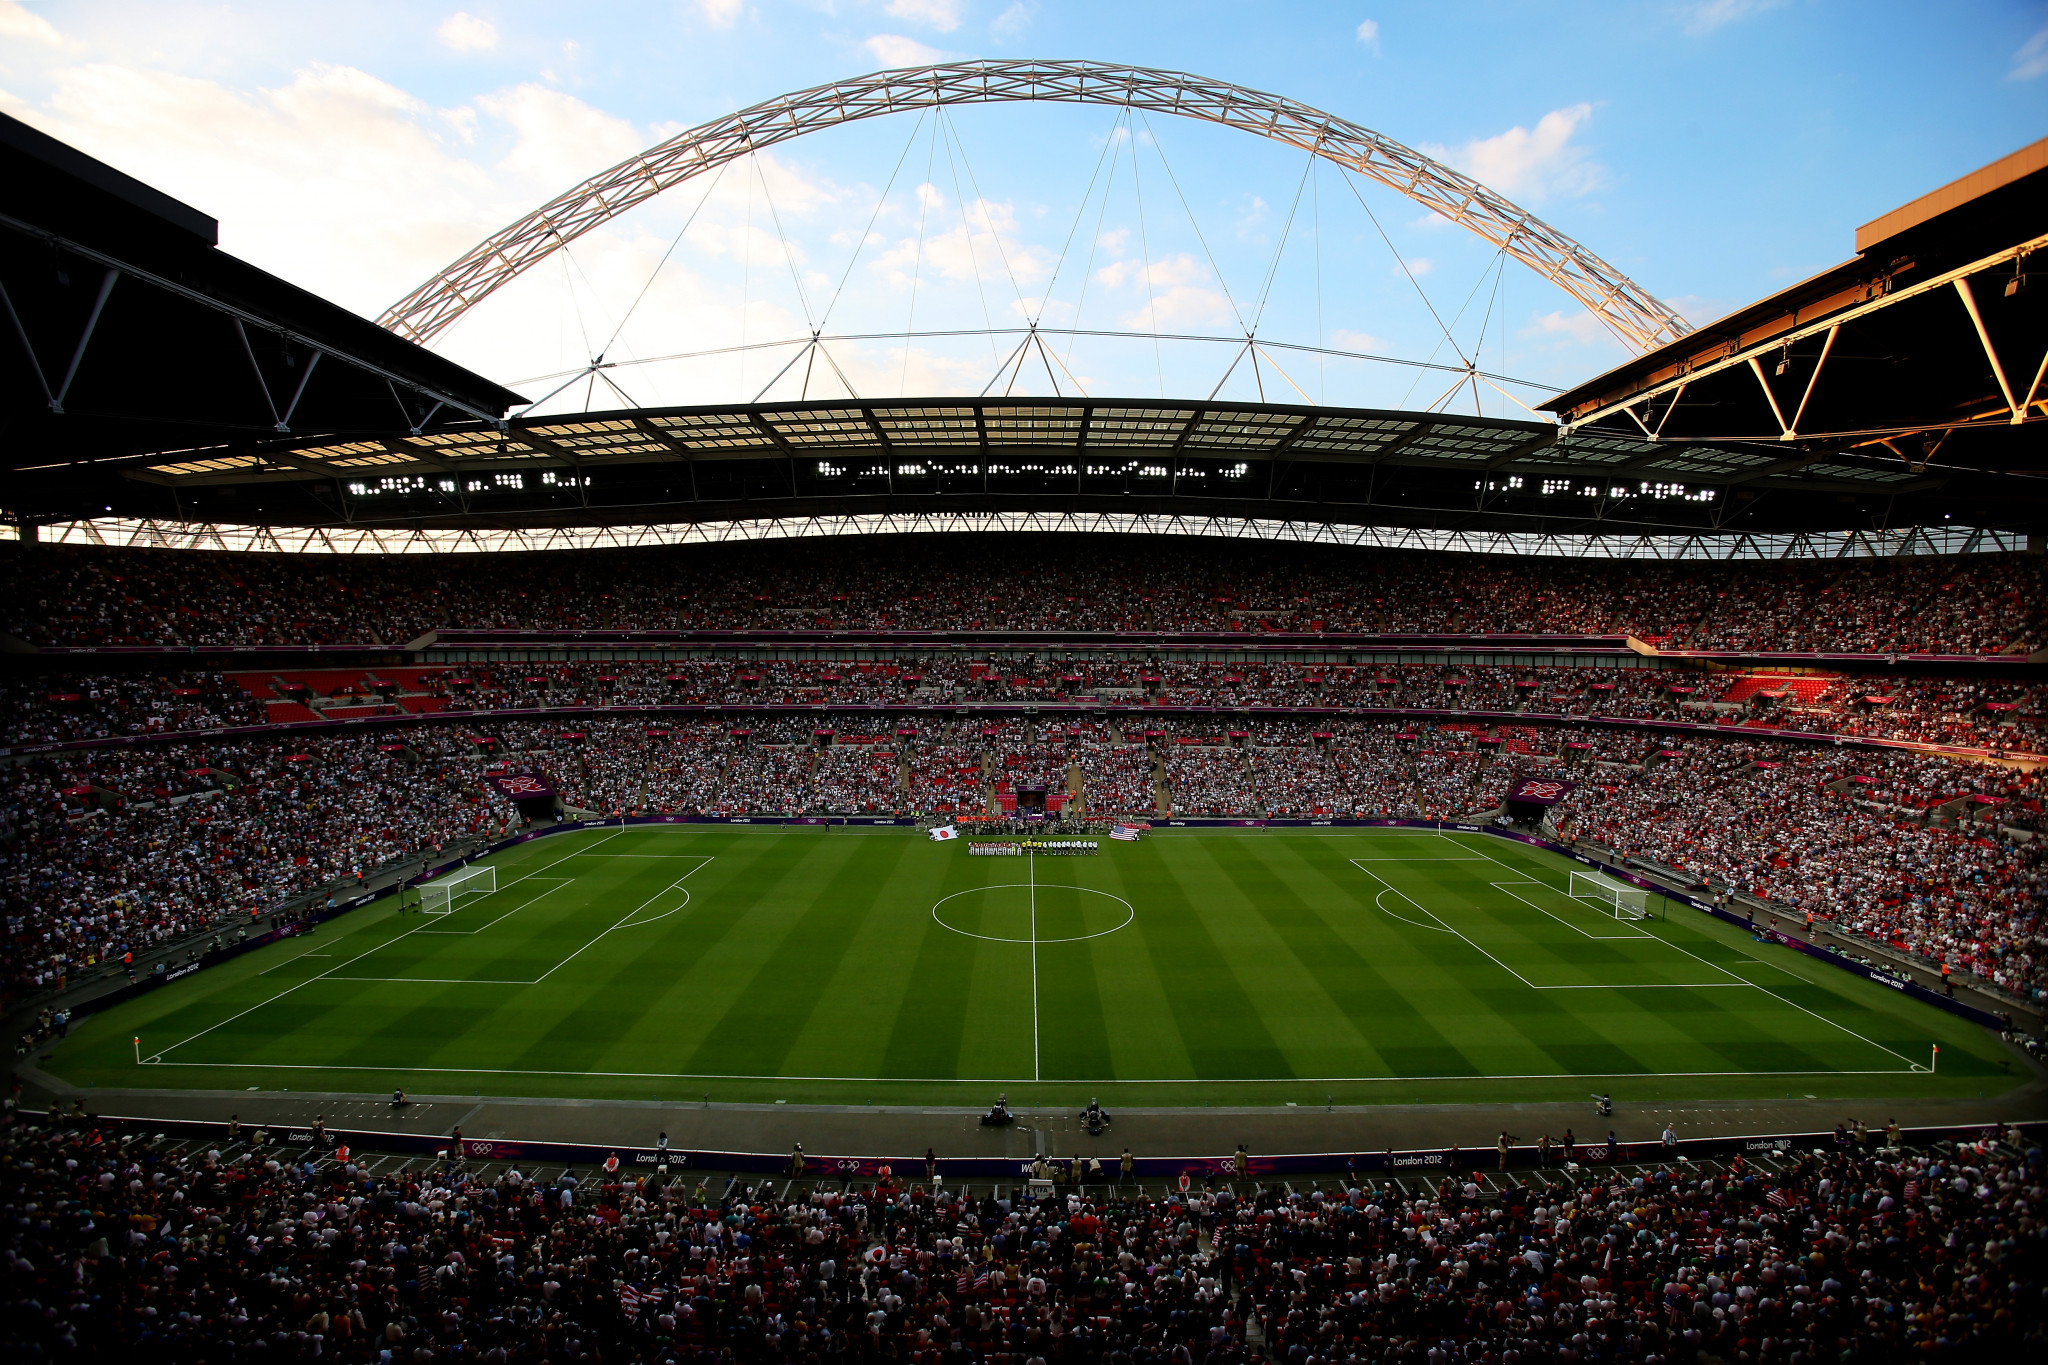 Fans at Wembley to require proof of vaccination or negative test for Euro 2020